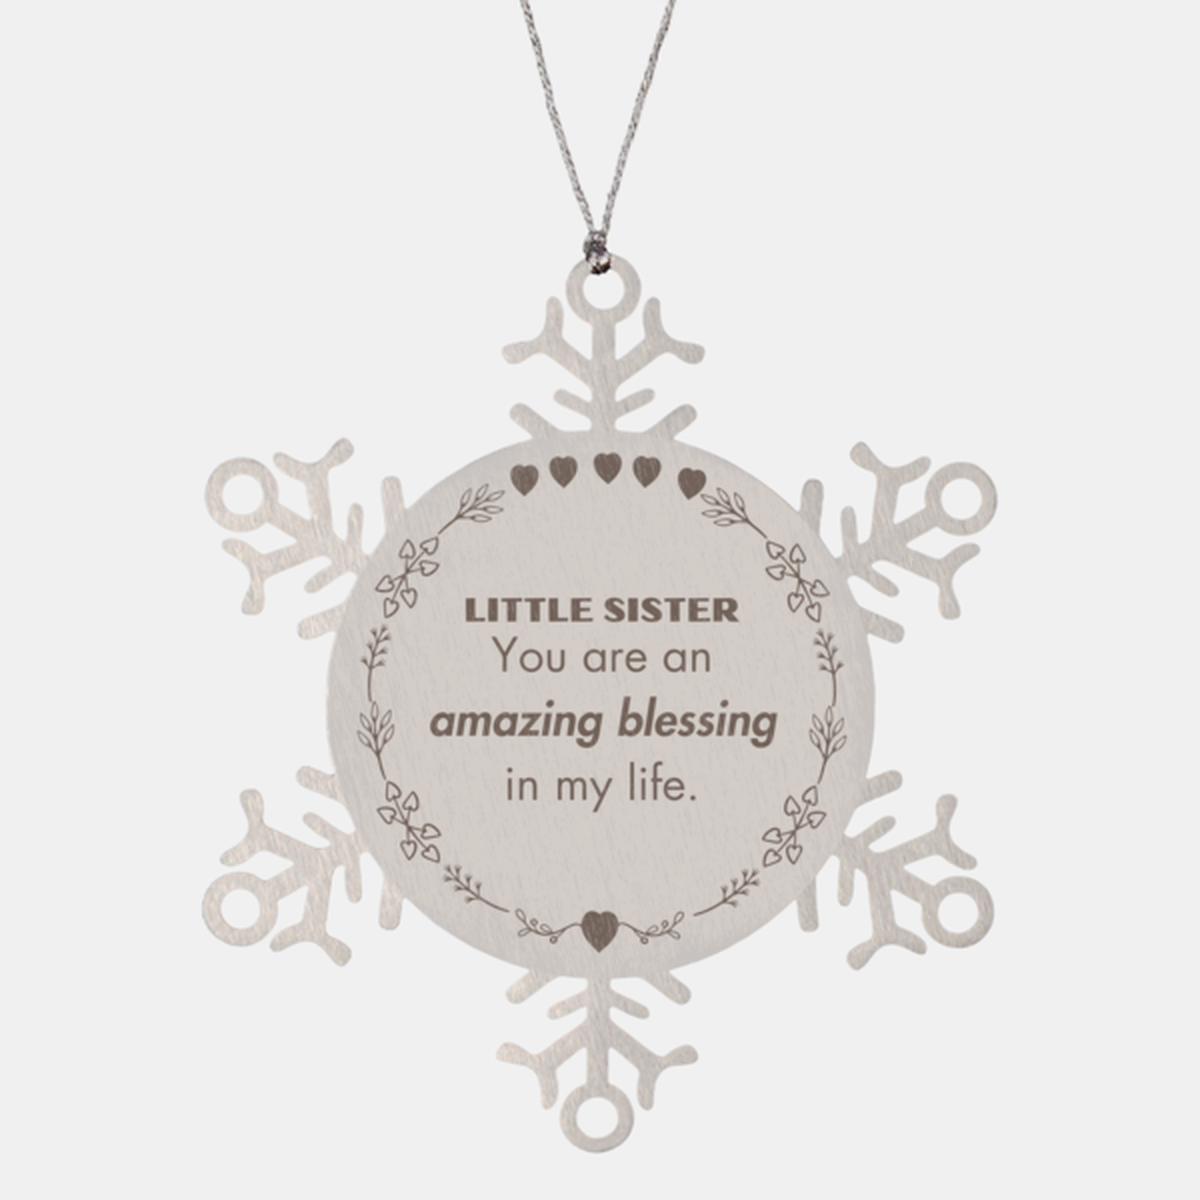 Little Sister Snowflake Ornament, You are an amazing blessing in my life, Thank You Gifts For Little Sister, Inspirational Birthday Christmas Unique Gifts For Little Sister